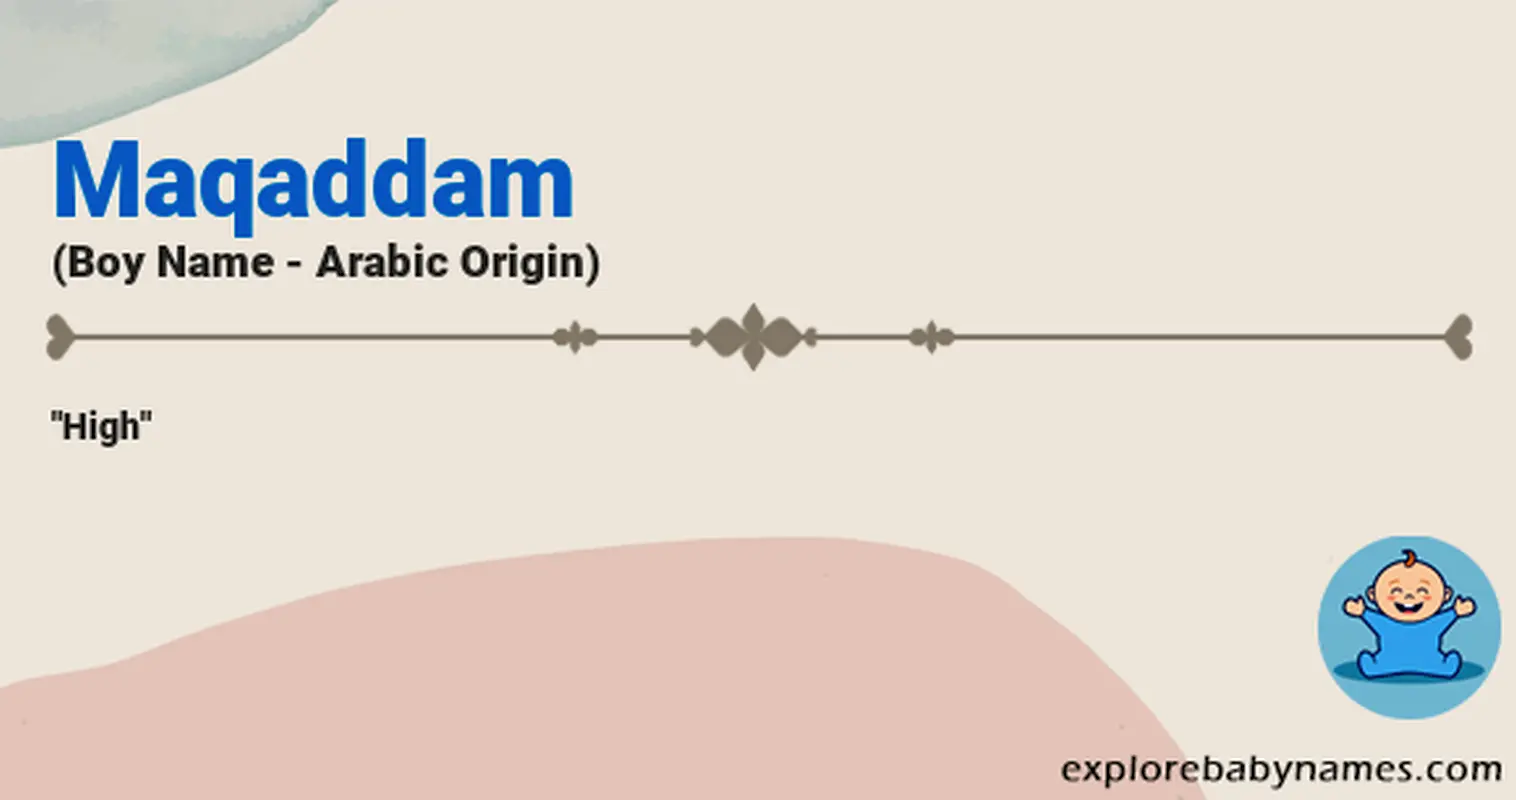 Meaning of Maqaddam